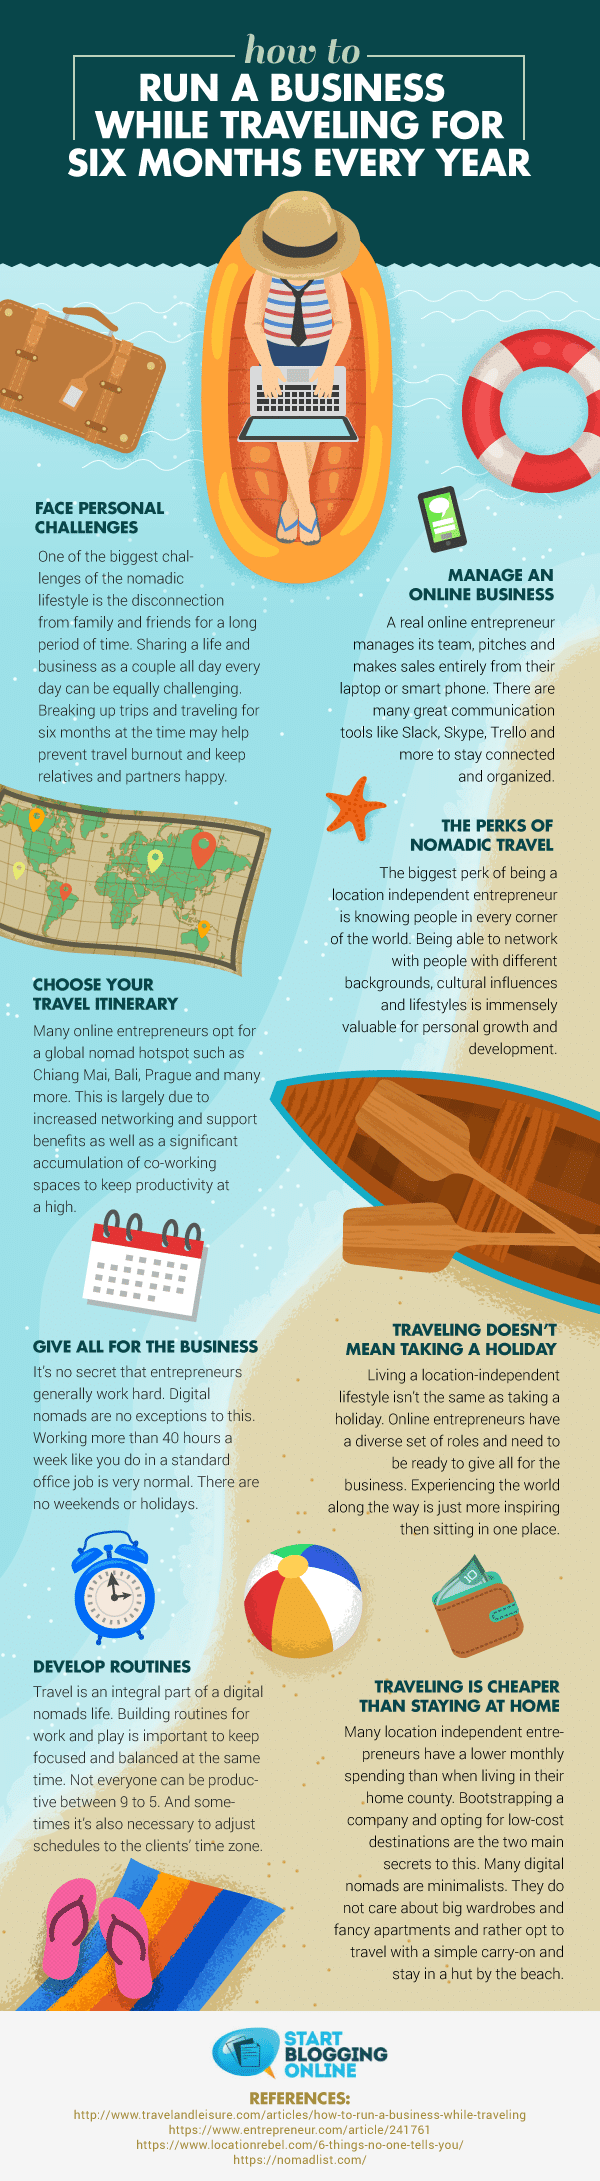 How to Run A Business While Traveling For Six Months Every Year